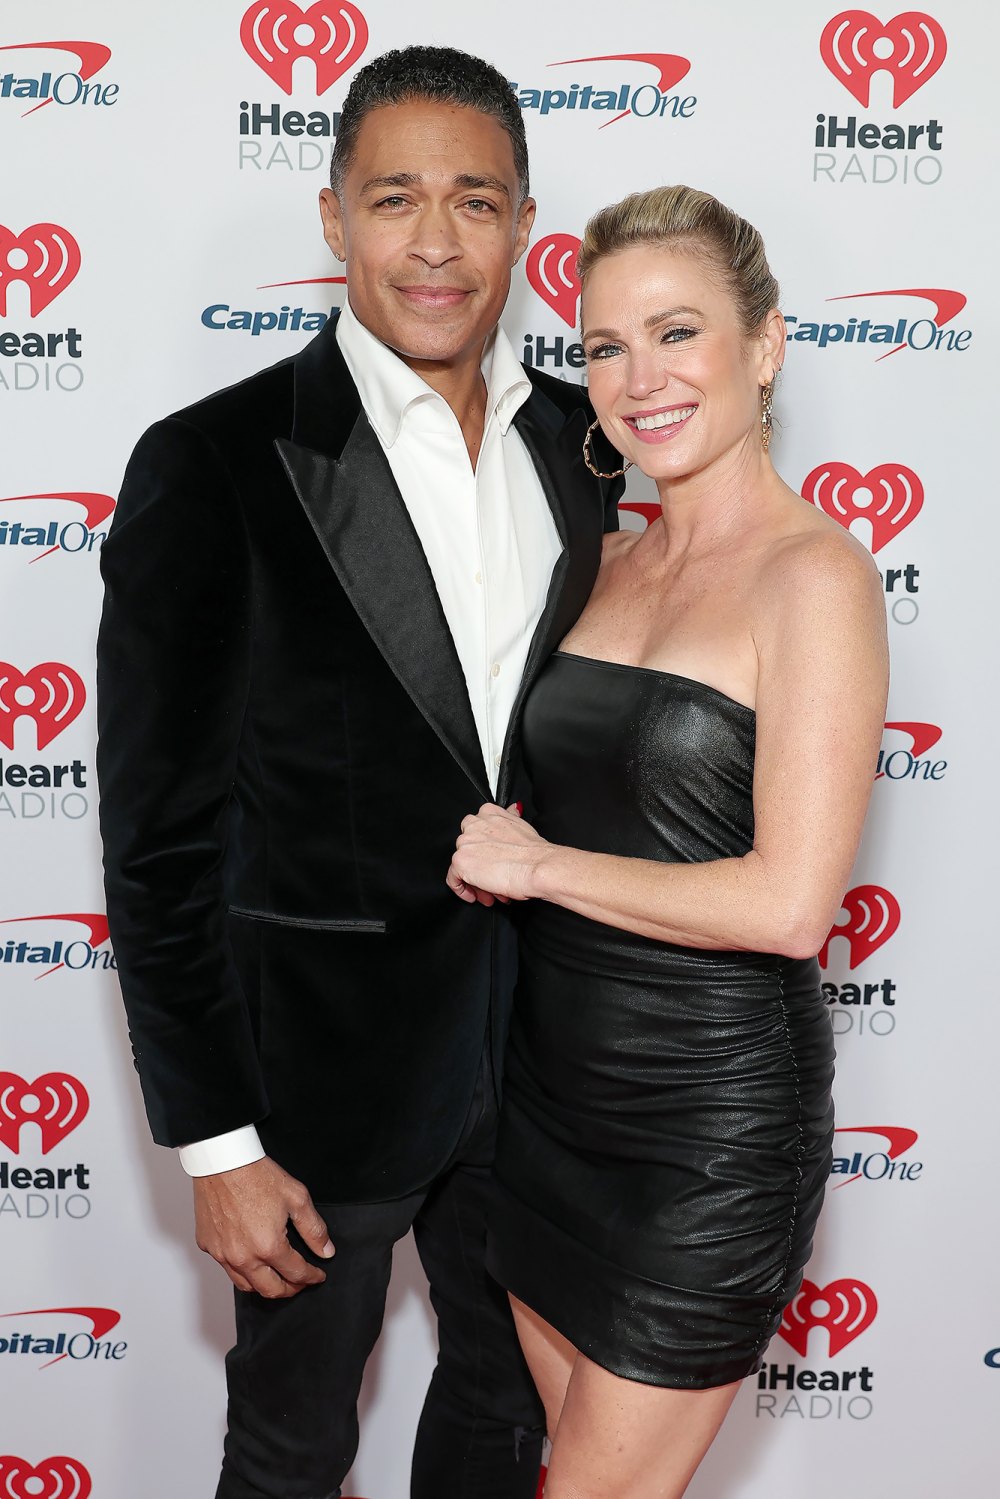 Amy Robach Shares Signs That Could Point to the End of a Marriage TJ Holmes